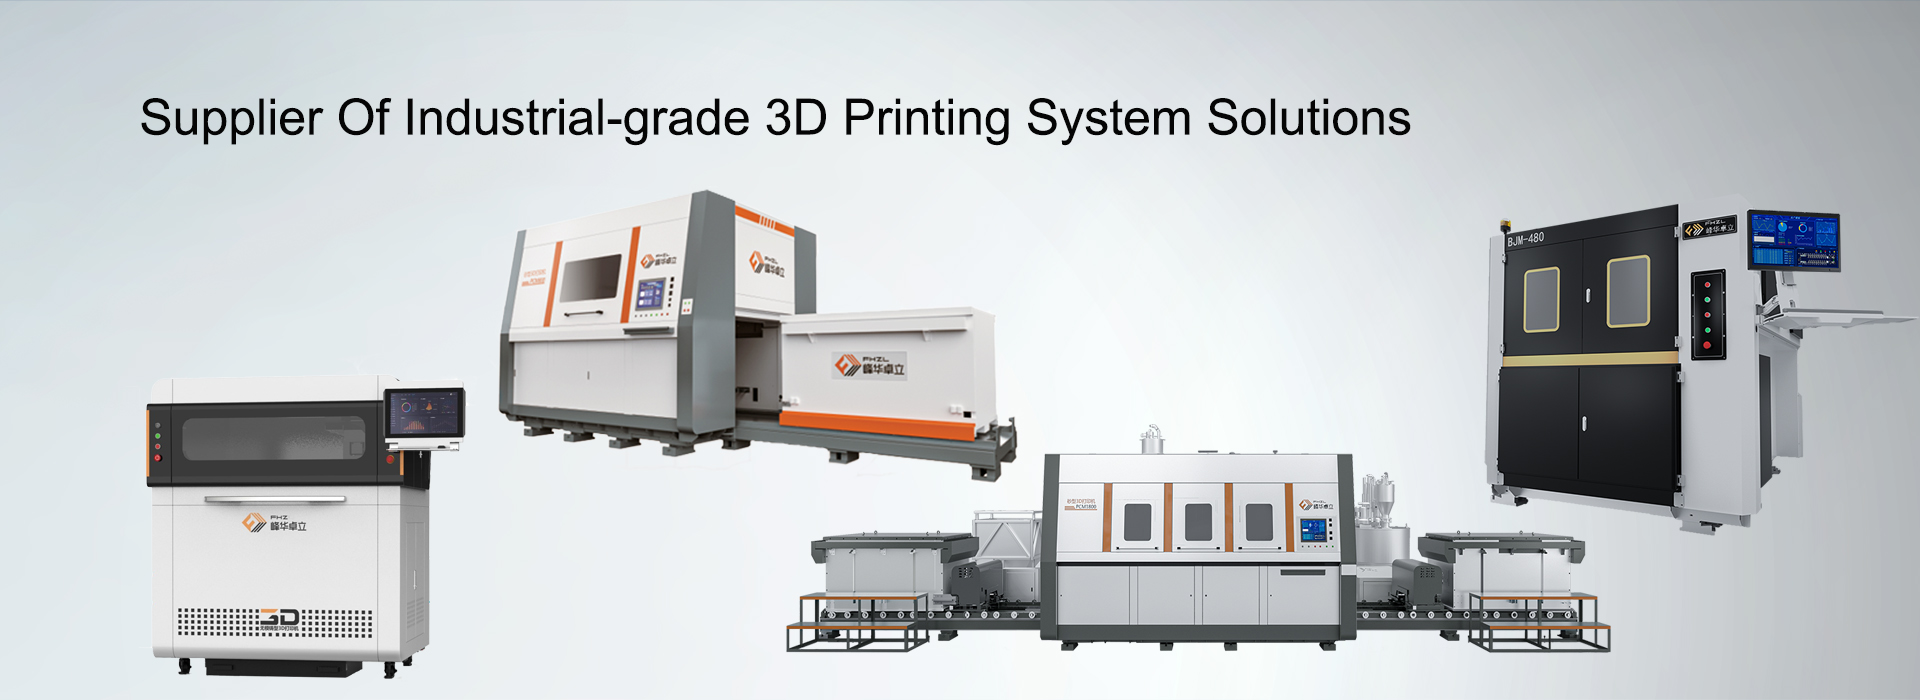 3D printing solutions